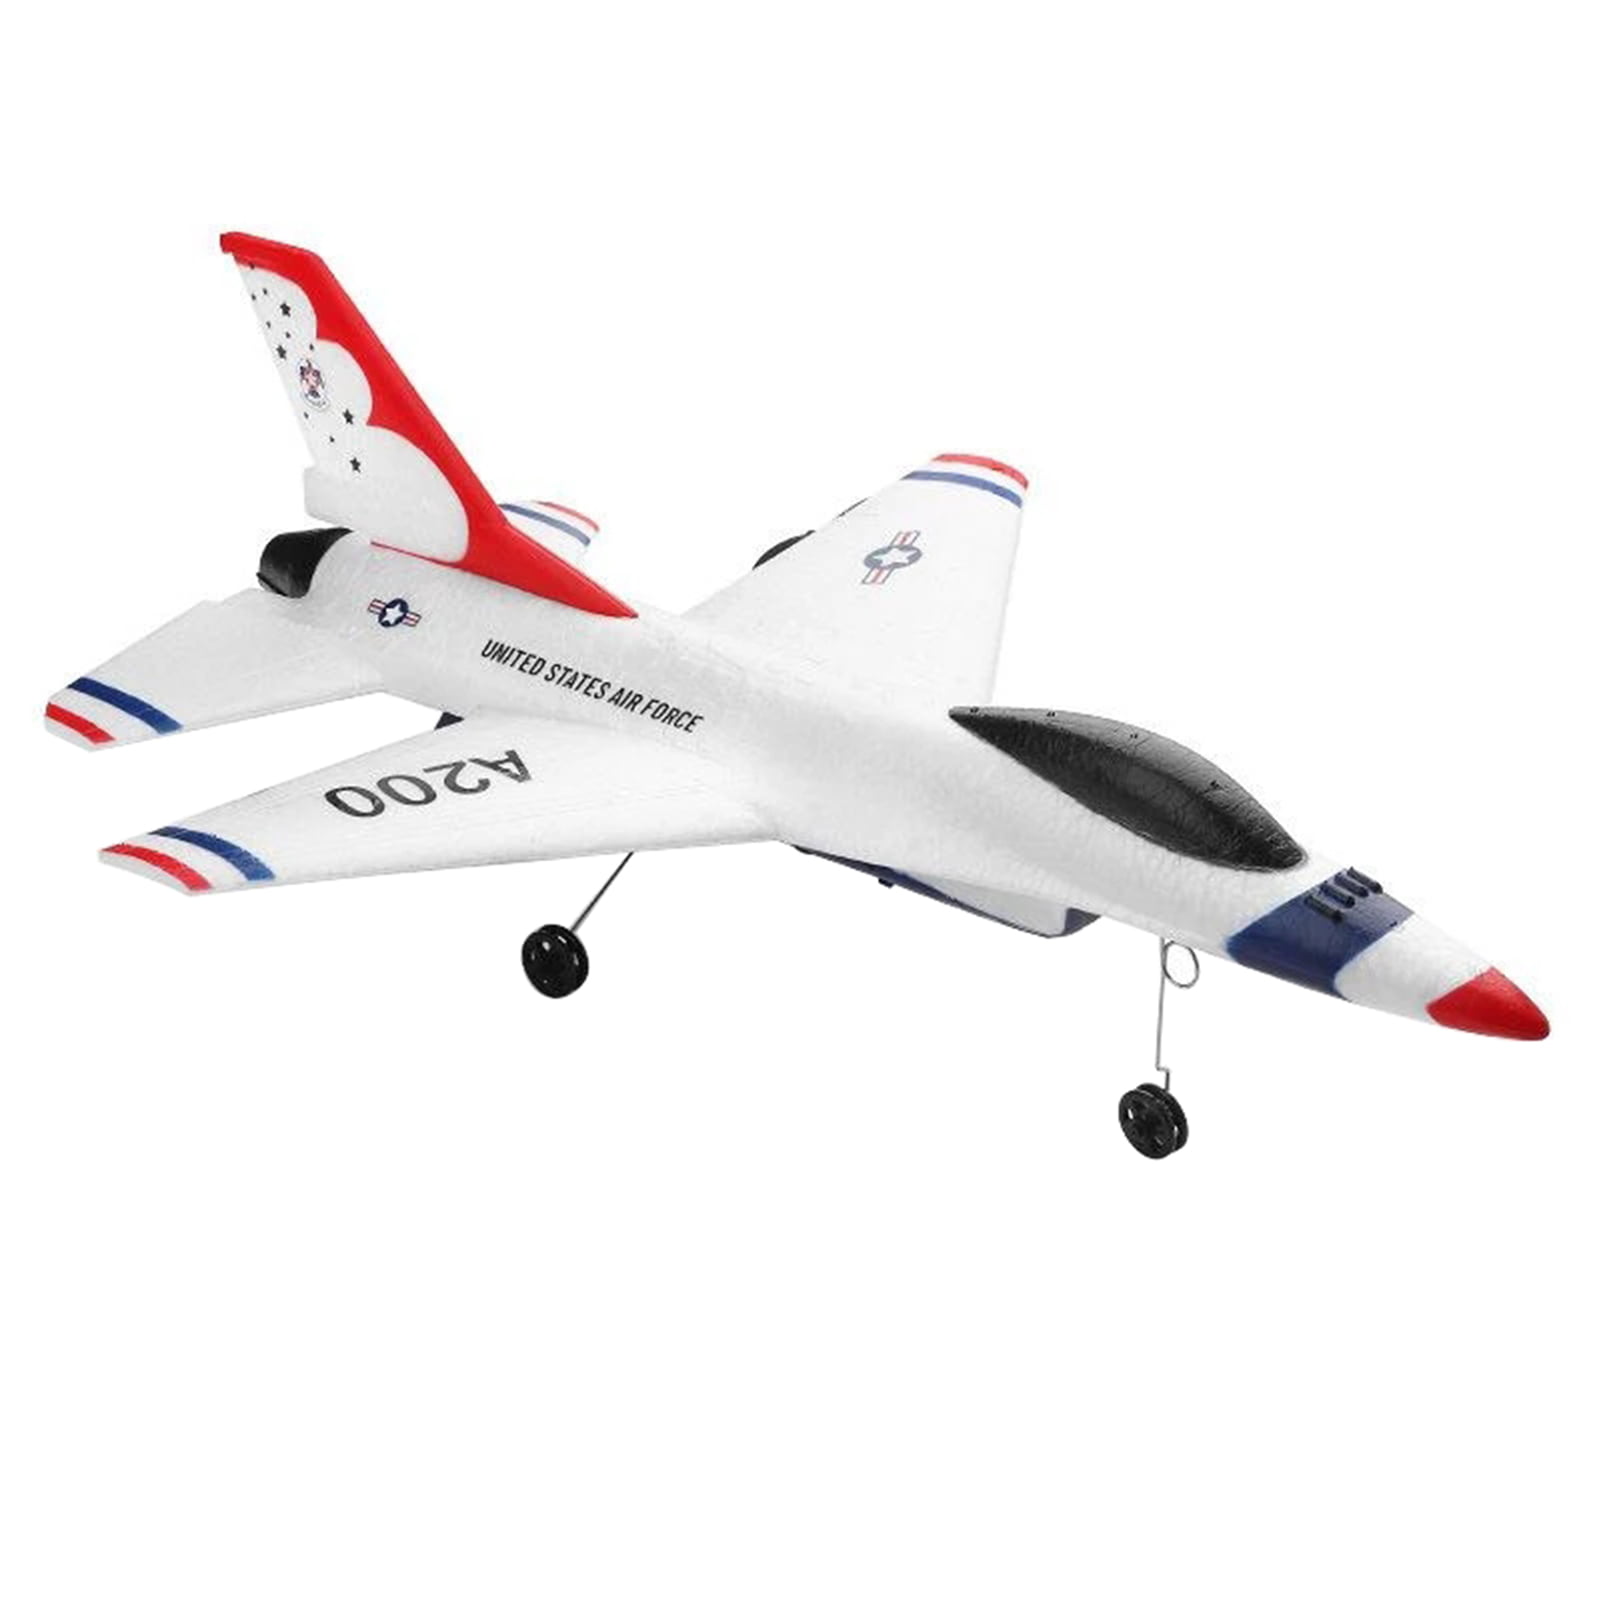 SparY RC Glider Airplane 2.4GHz Radio Control Aircraft with Built Gyro 823 2CH F16 ​​Thunderbirds Remote Control EPP Airplane for Beginners Ready to Fly Range Range Meters